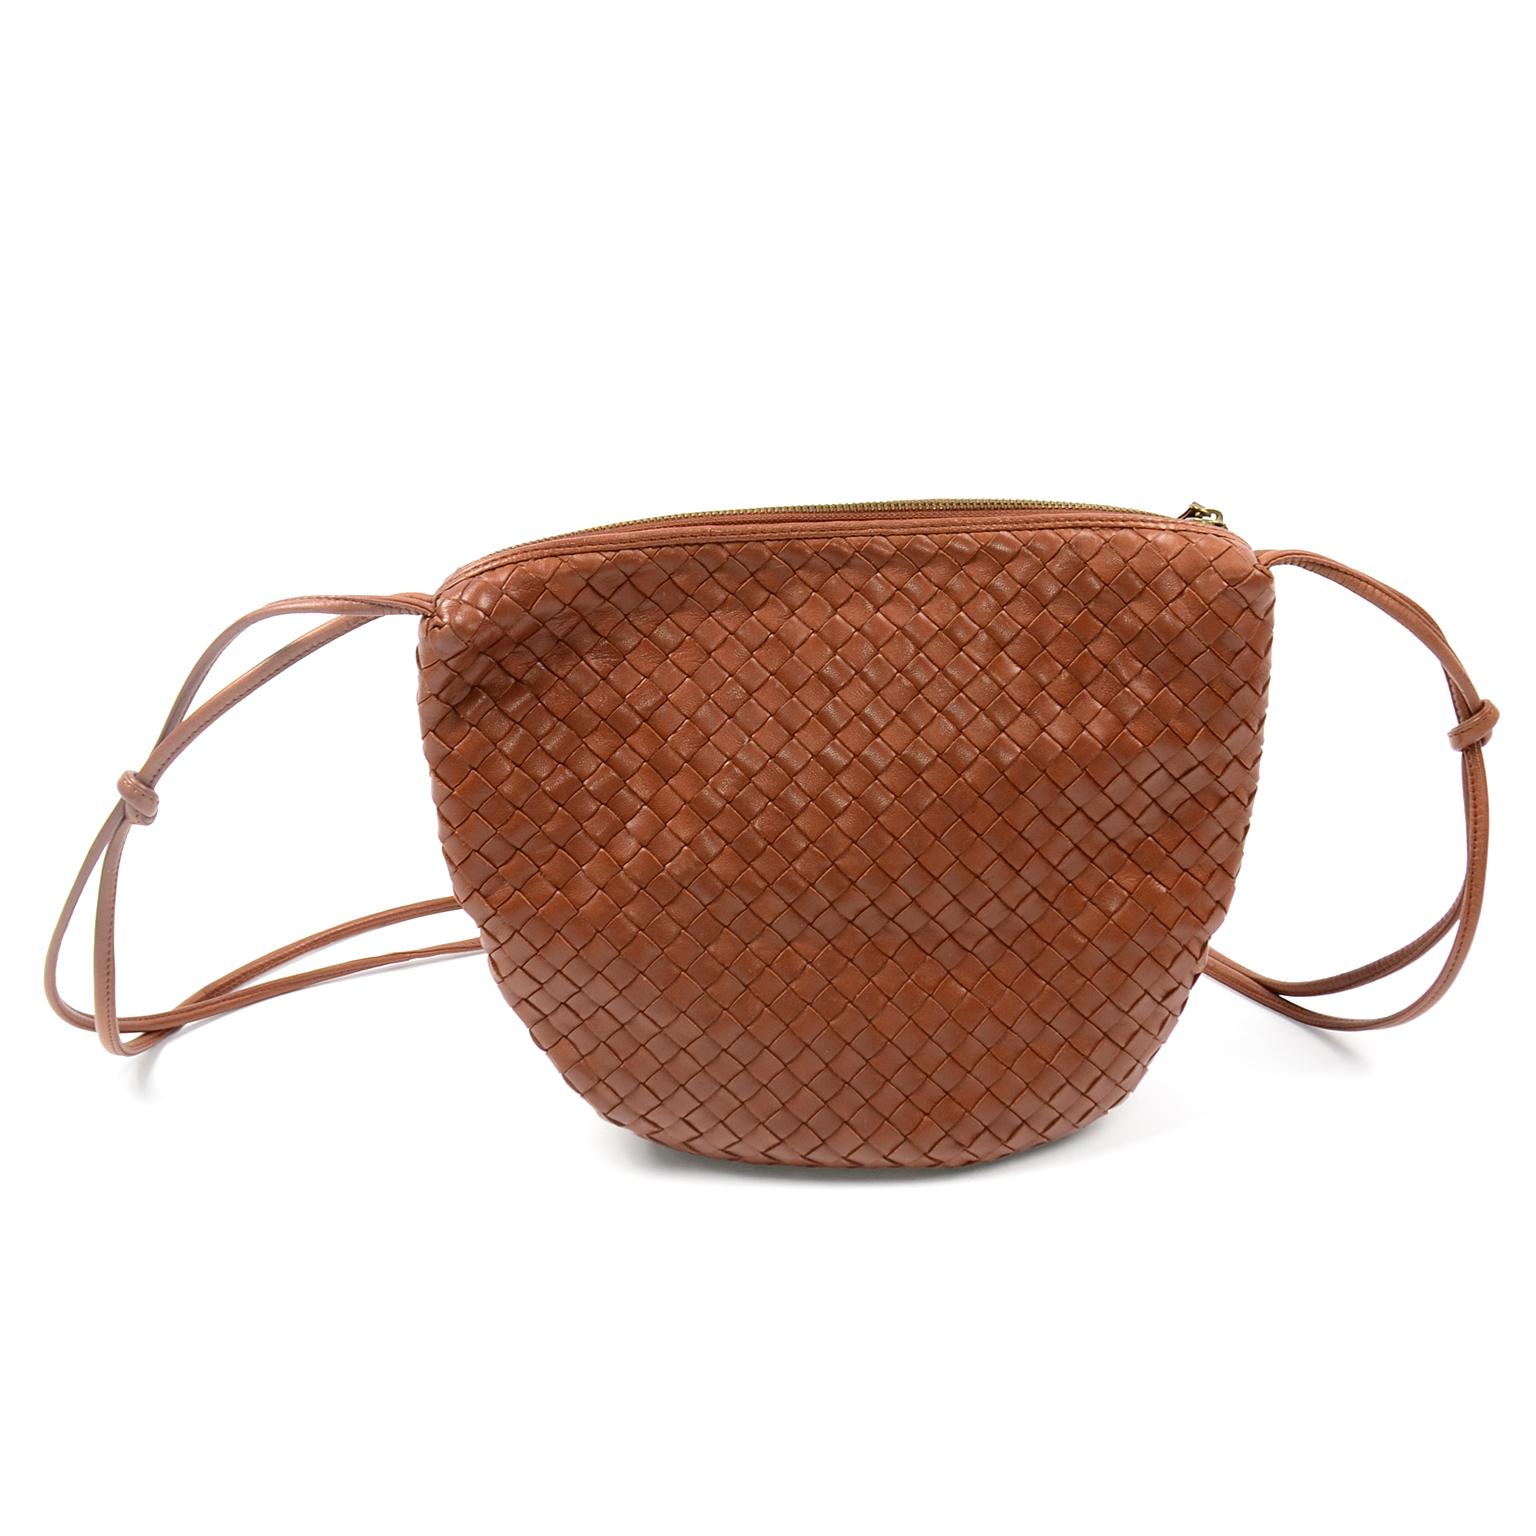 This is a timeless vintage shoulder or crossbody bag by Bottega Veneta, with intrecciato woven leather and a double leather strap that is knotted in three different places. This beautiful  bag has a zip closure on the top with a tassel zipper pull,